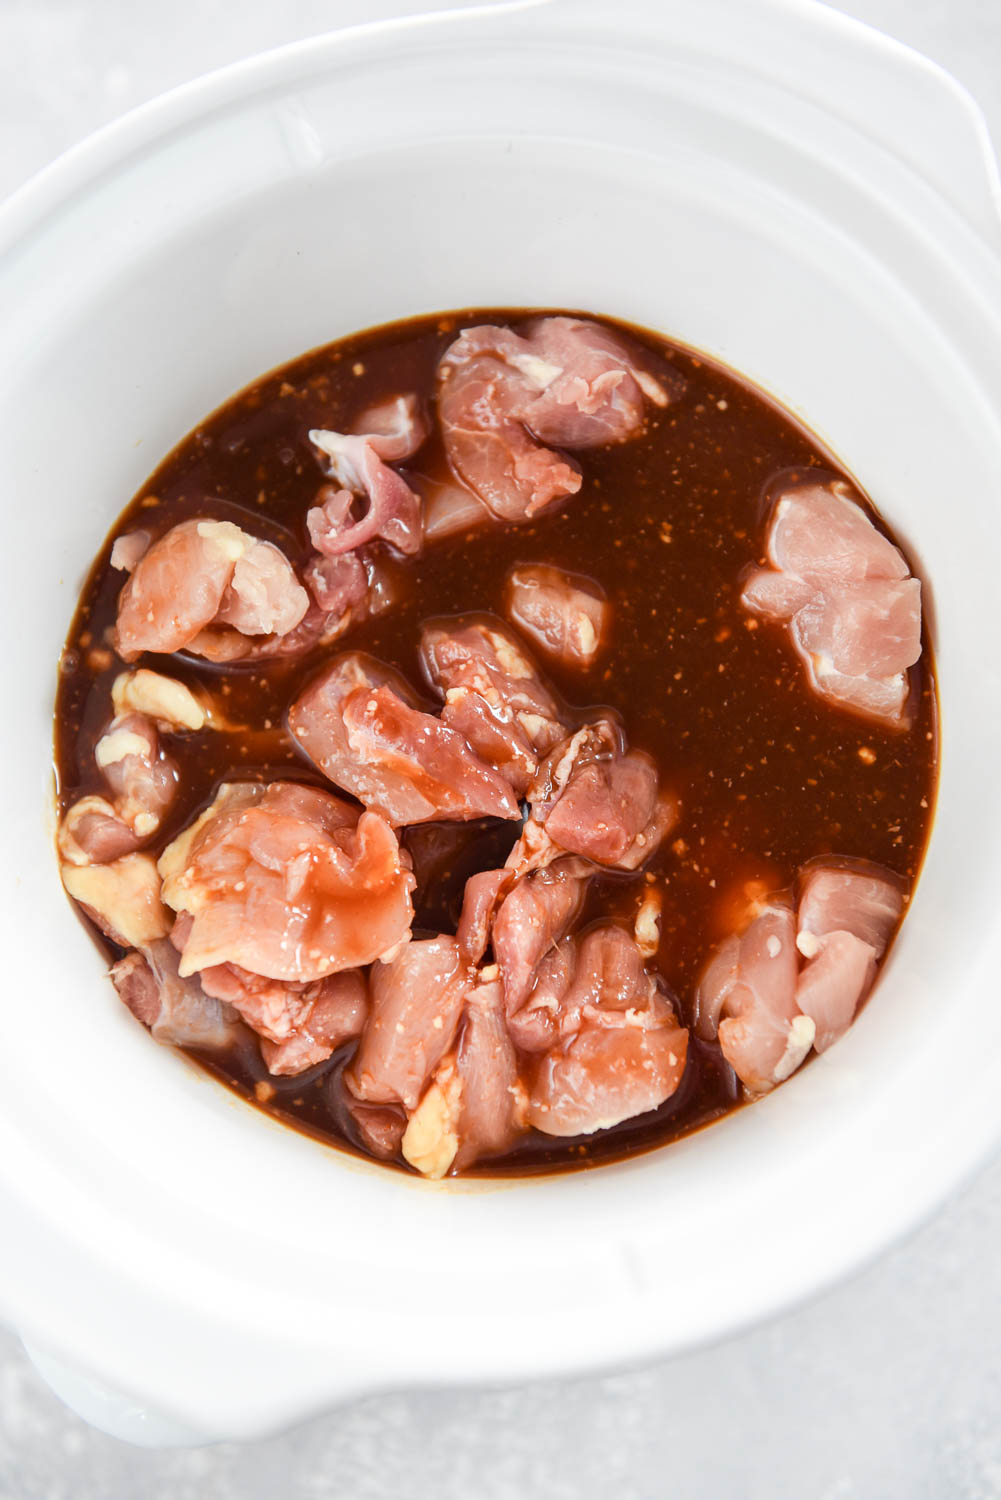 Raw chicken inside of sauce mixture in white slow cooker bowl